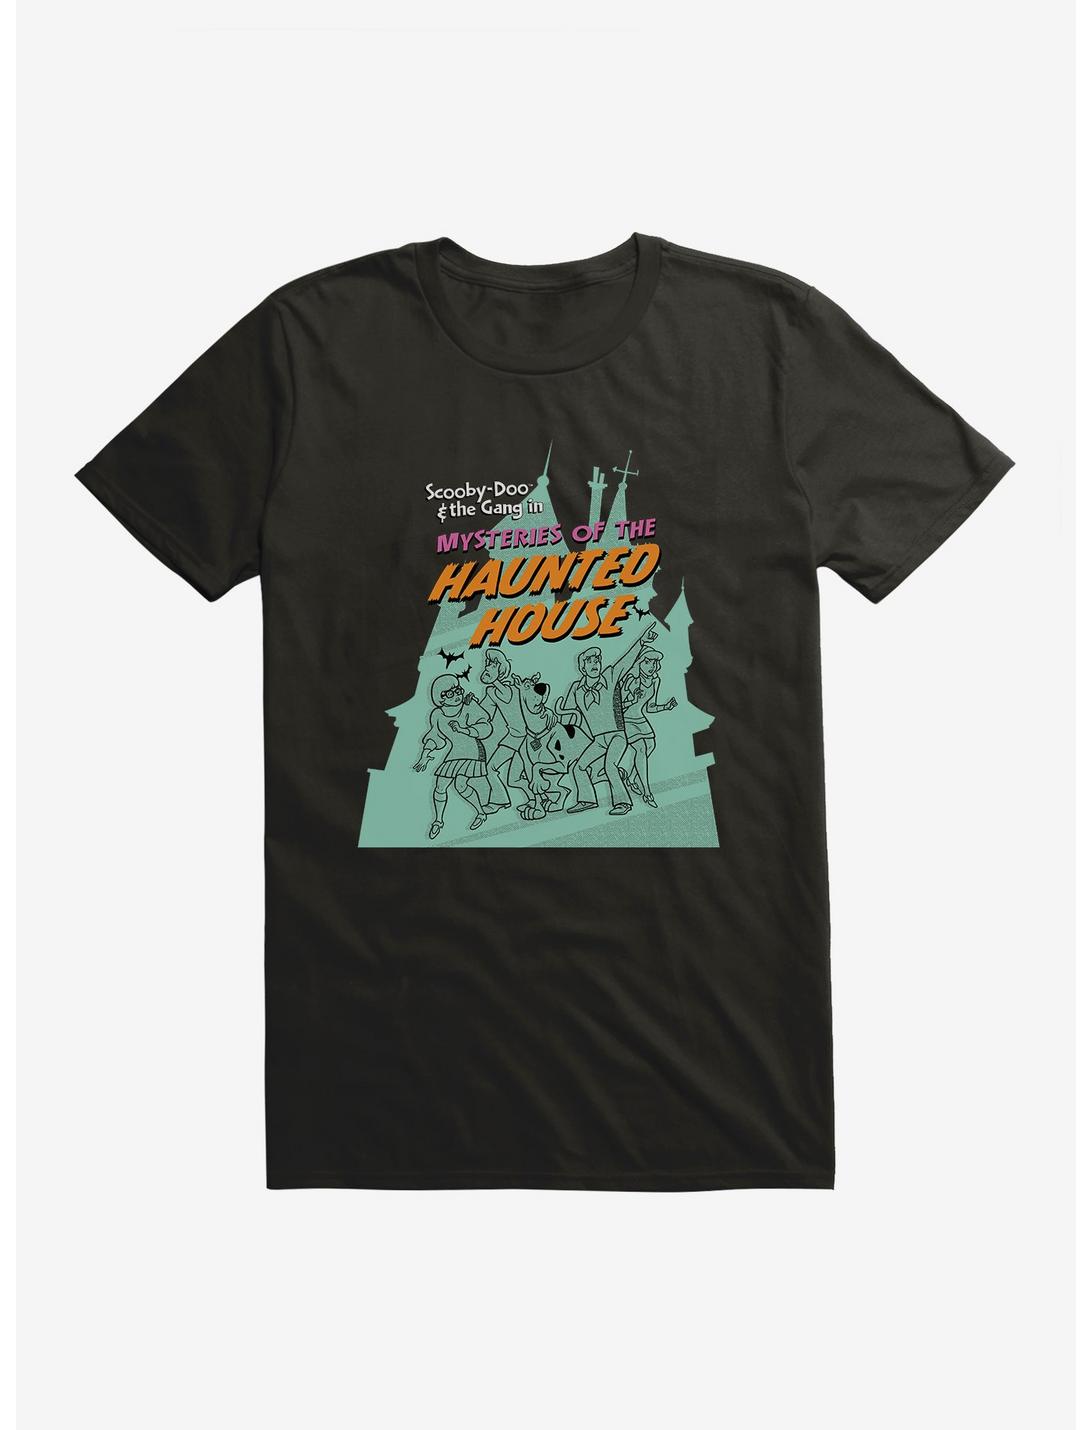 Scooby-Doo Halloween Scooby And The Gang Mysteries Of The Haunted House T-Shirt, , hi-res